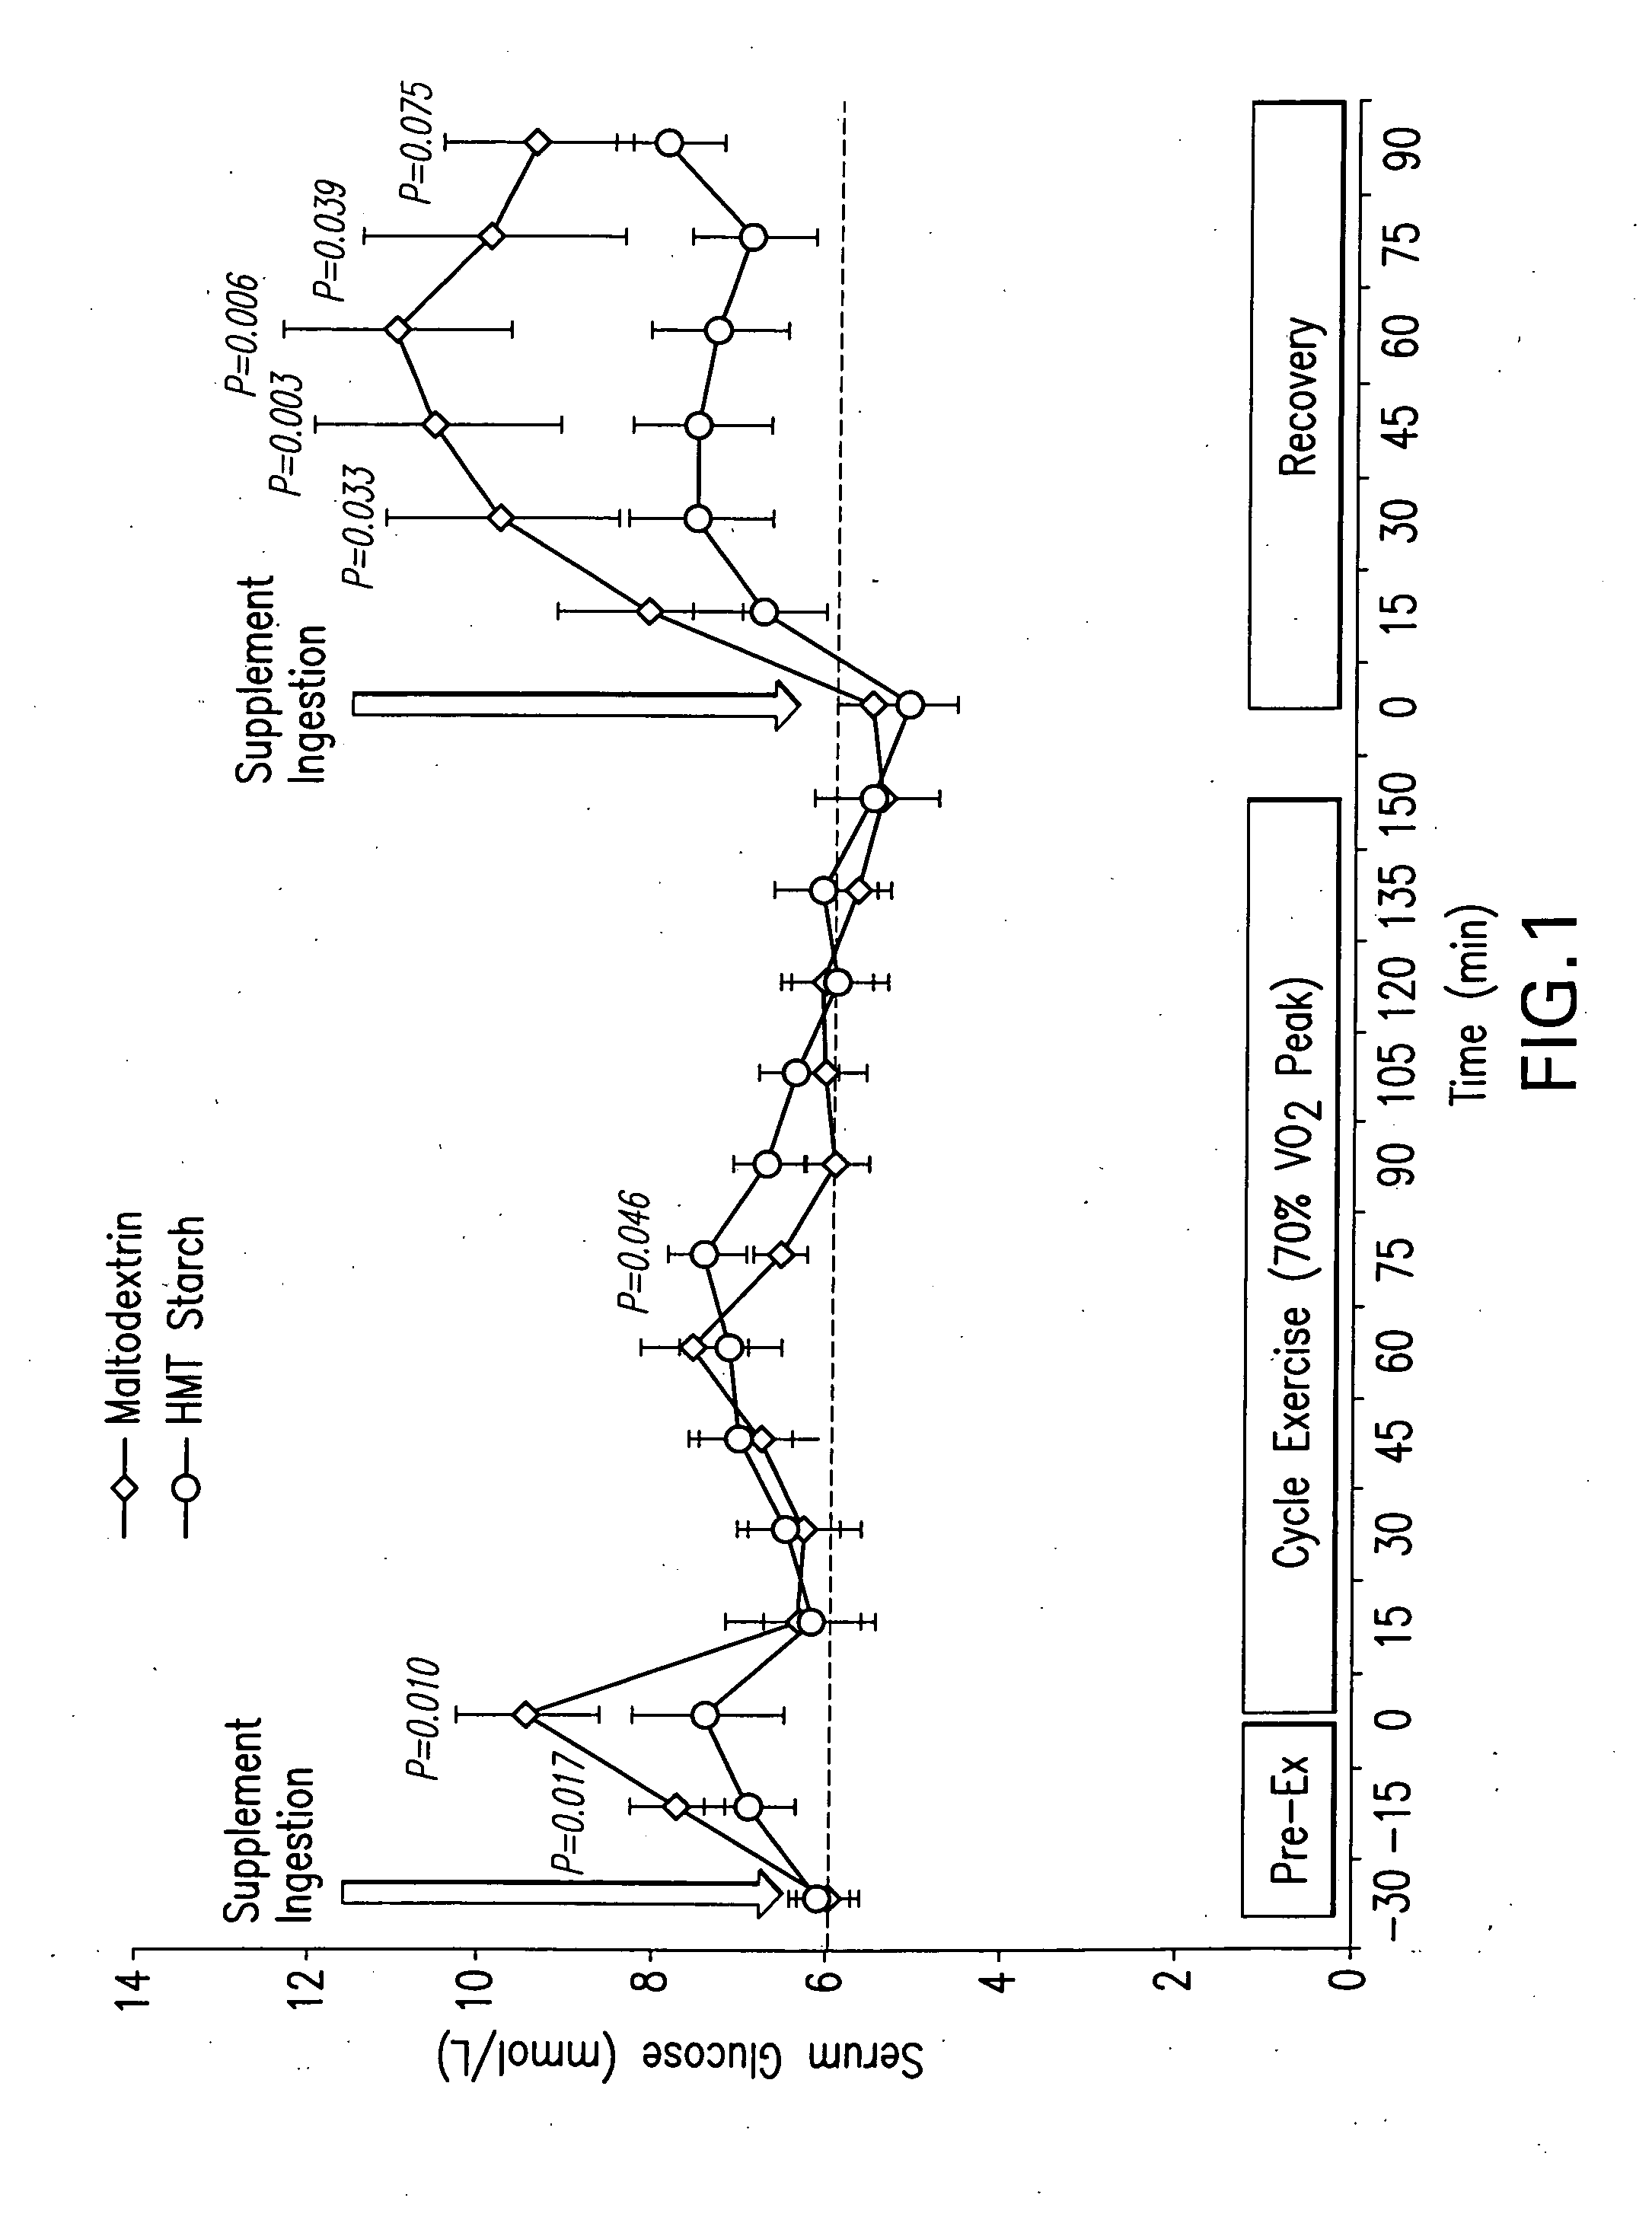 Heat moisture treated carbohydrates and uses thereof